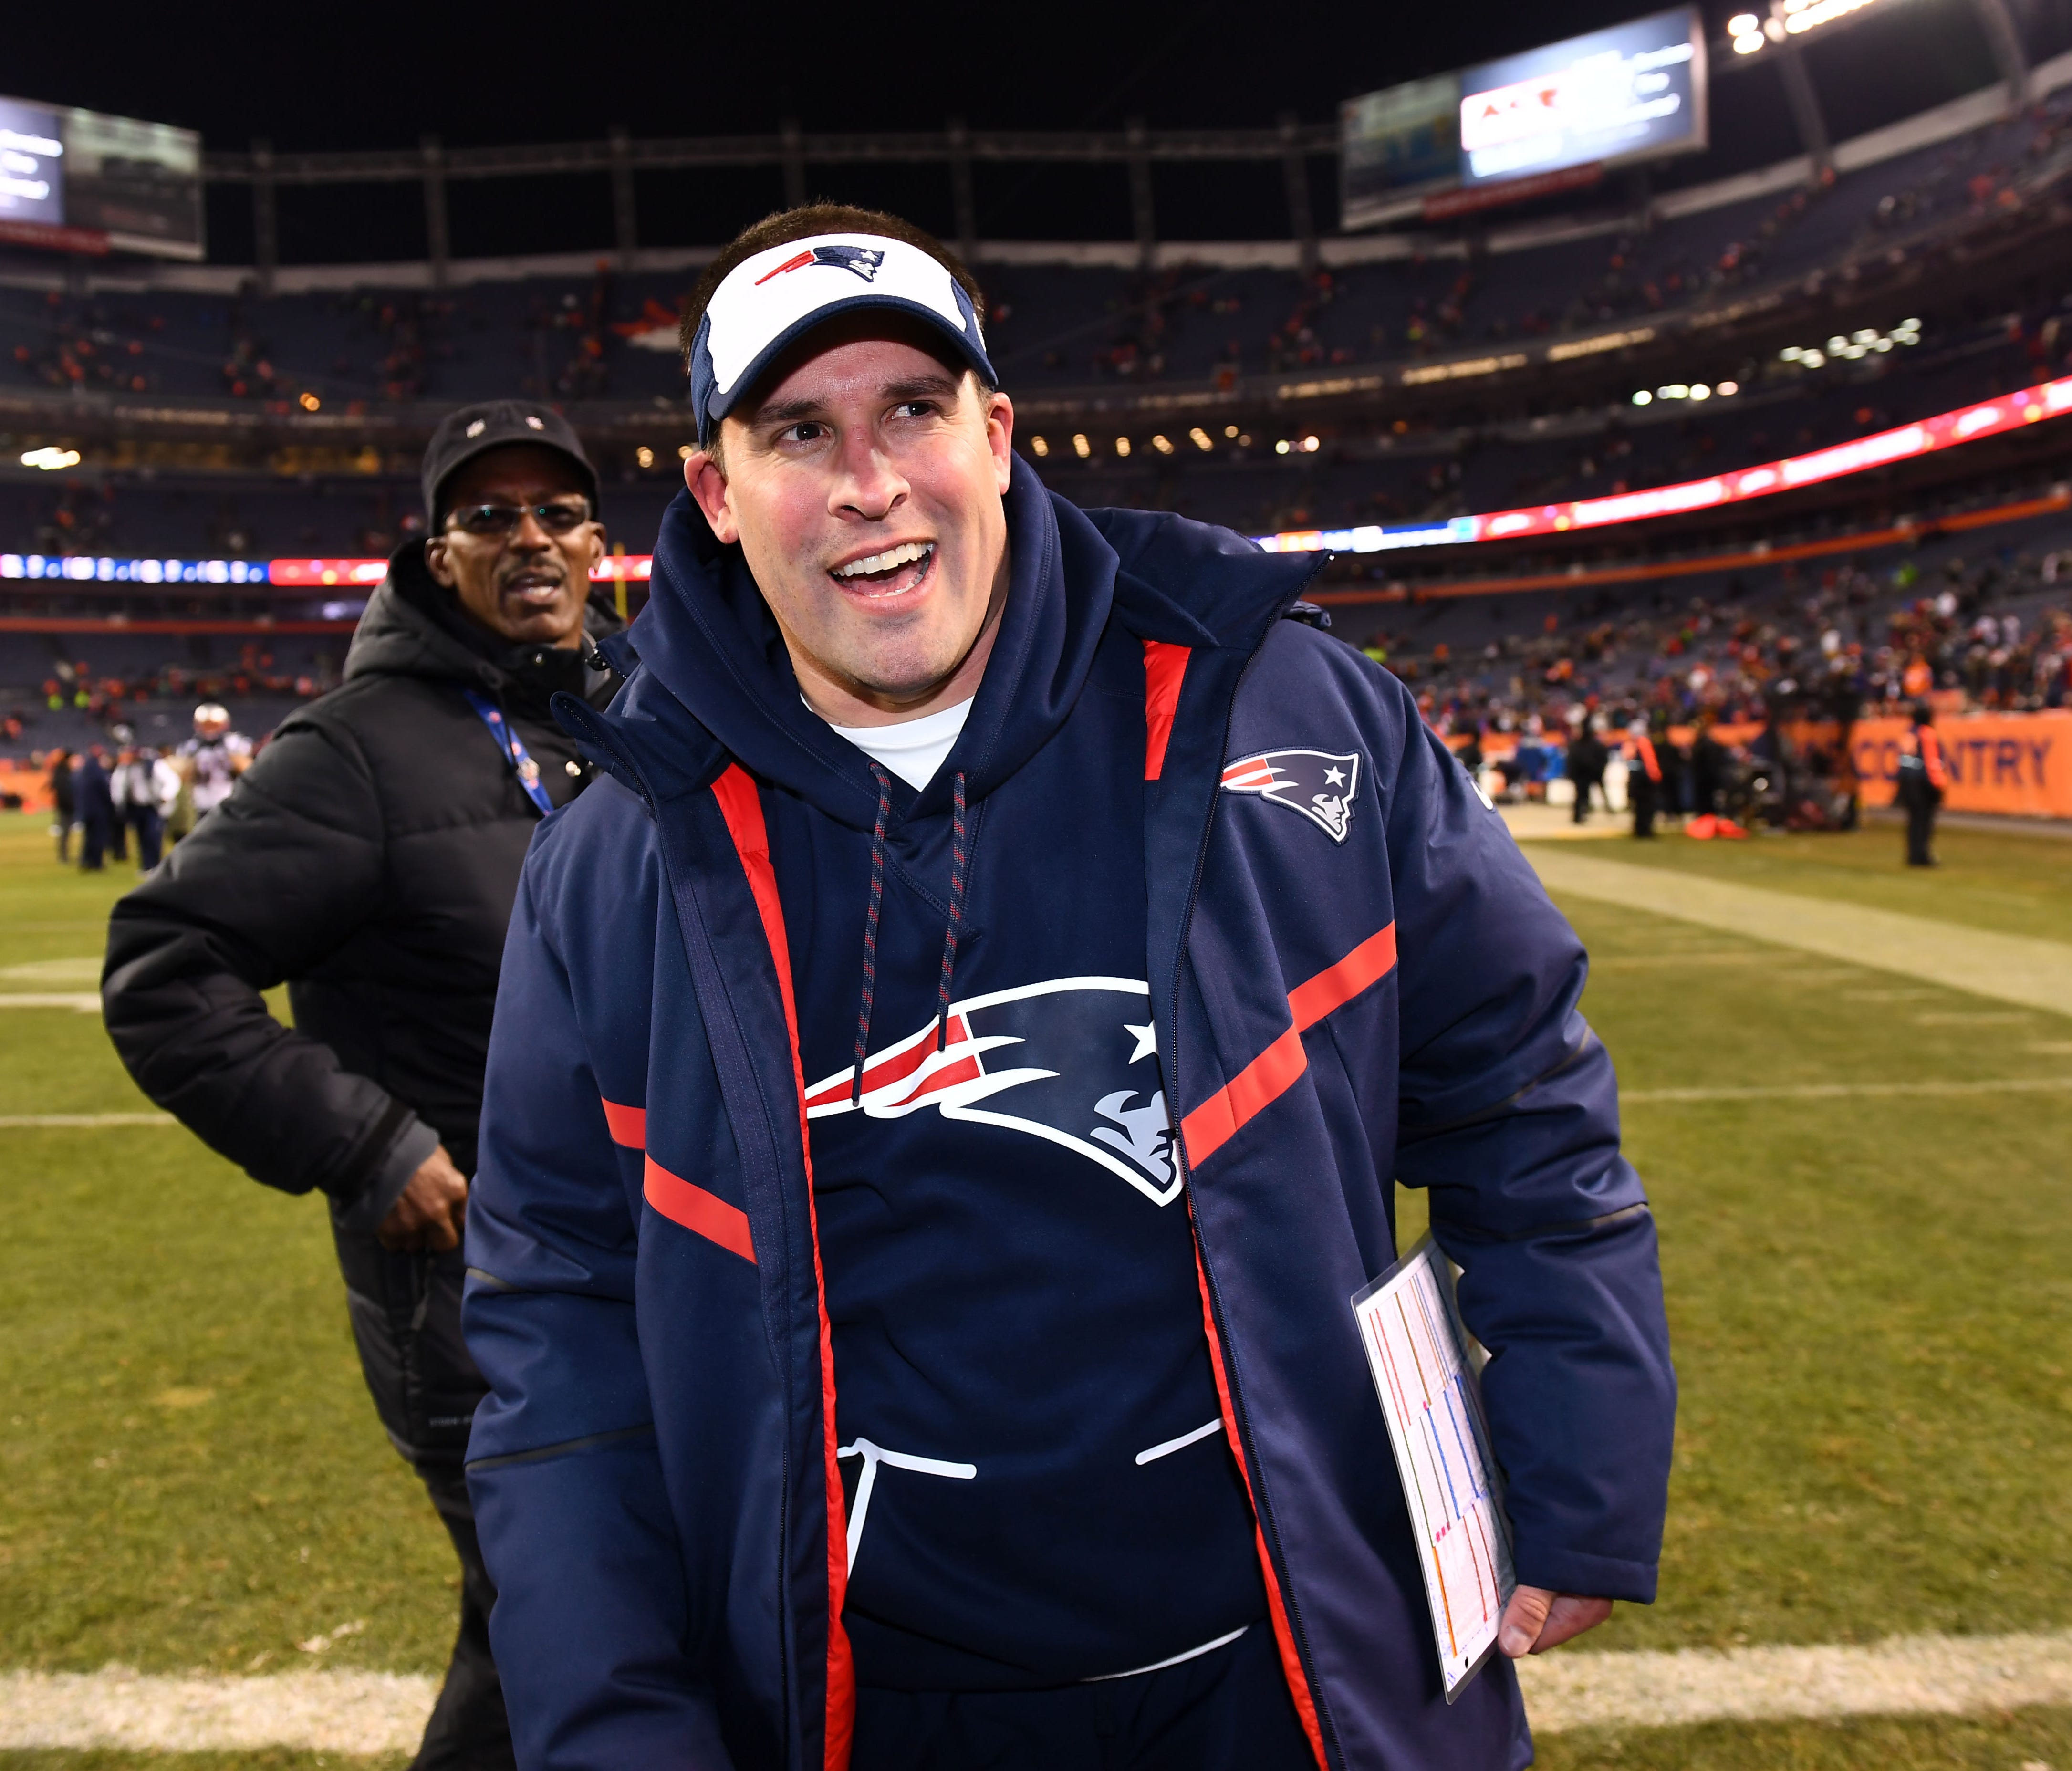 New England Patriots offensive coordinator Josh McDaniels reacts as he leaves the field following the win against the Denver Broncos at Sports Authority Field.